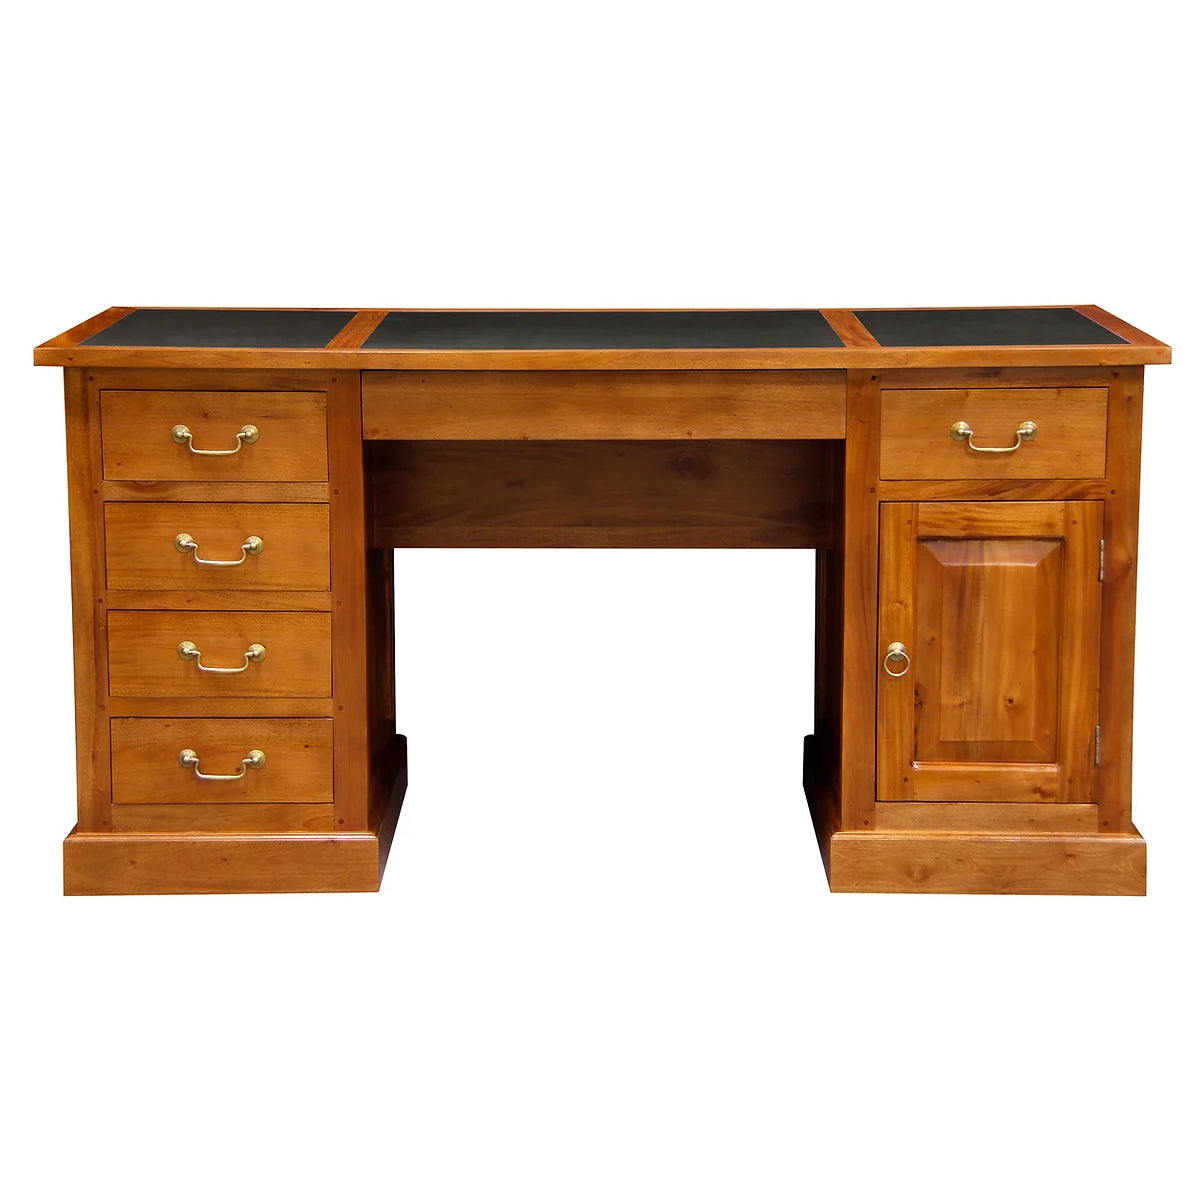 Tasmania Timber Desk with Faux Leather Top - Light Pecan - Notbrand